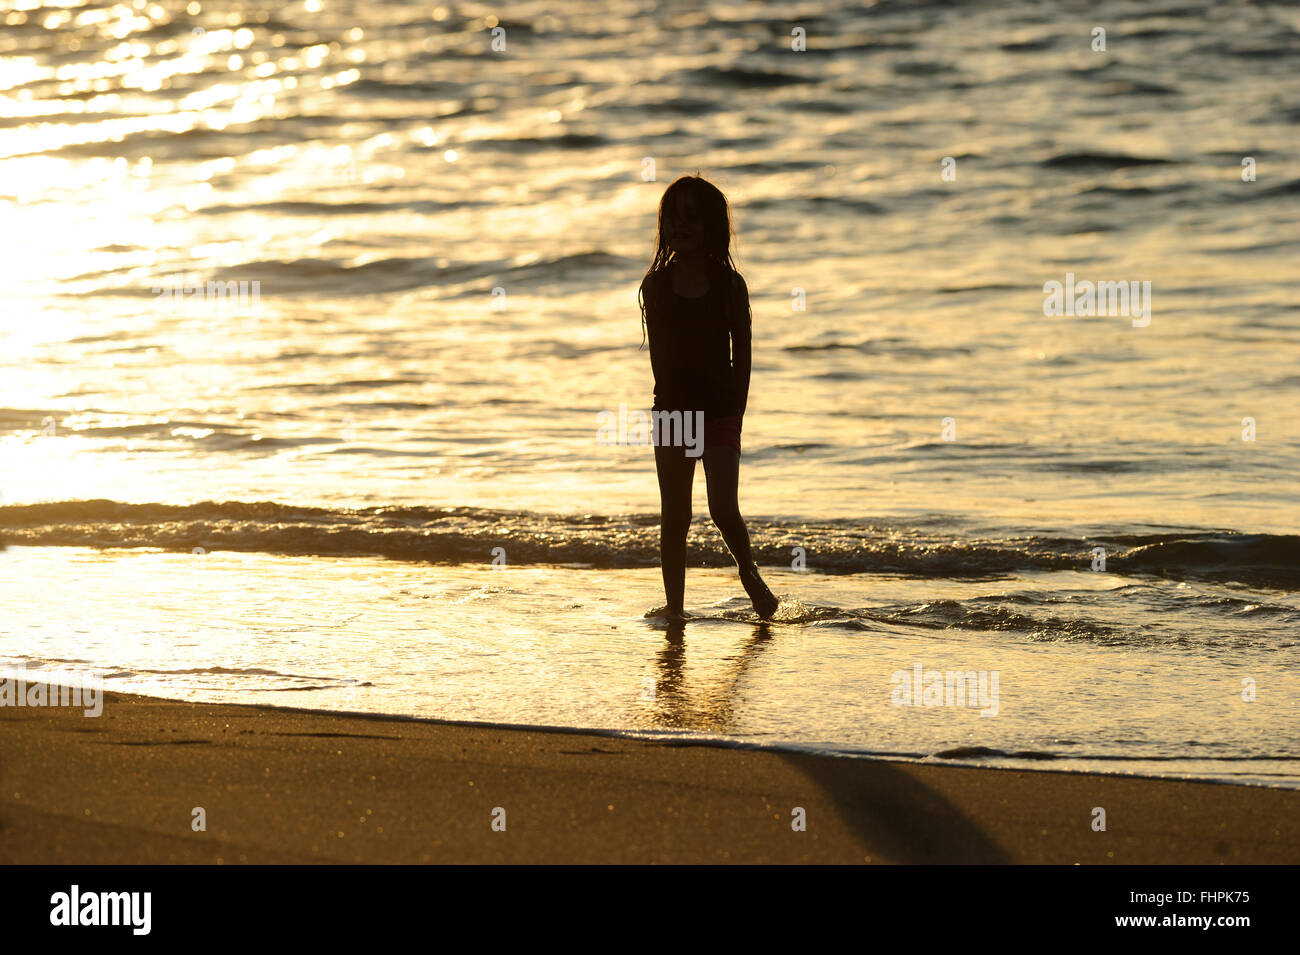 Beach girl silhouette is a striking silhouette of girl standing in the water at the beach. Stock Photo